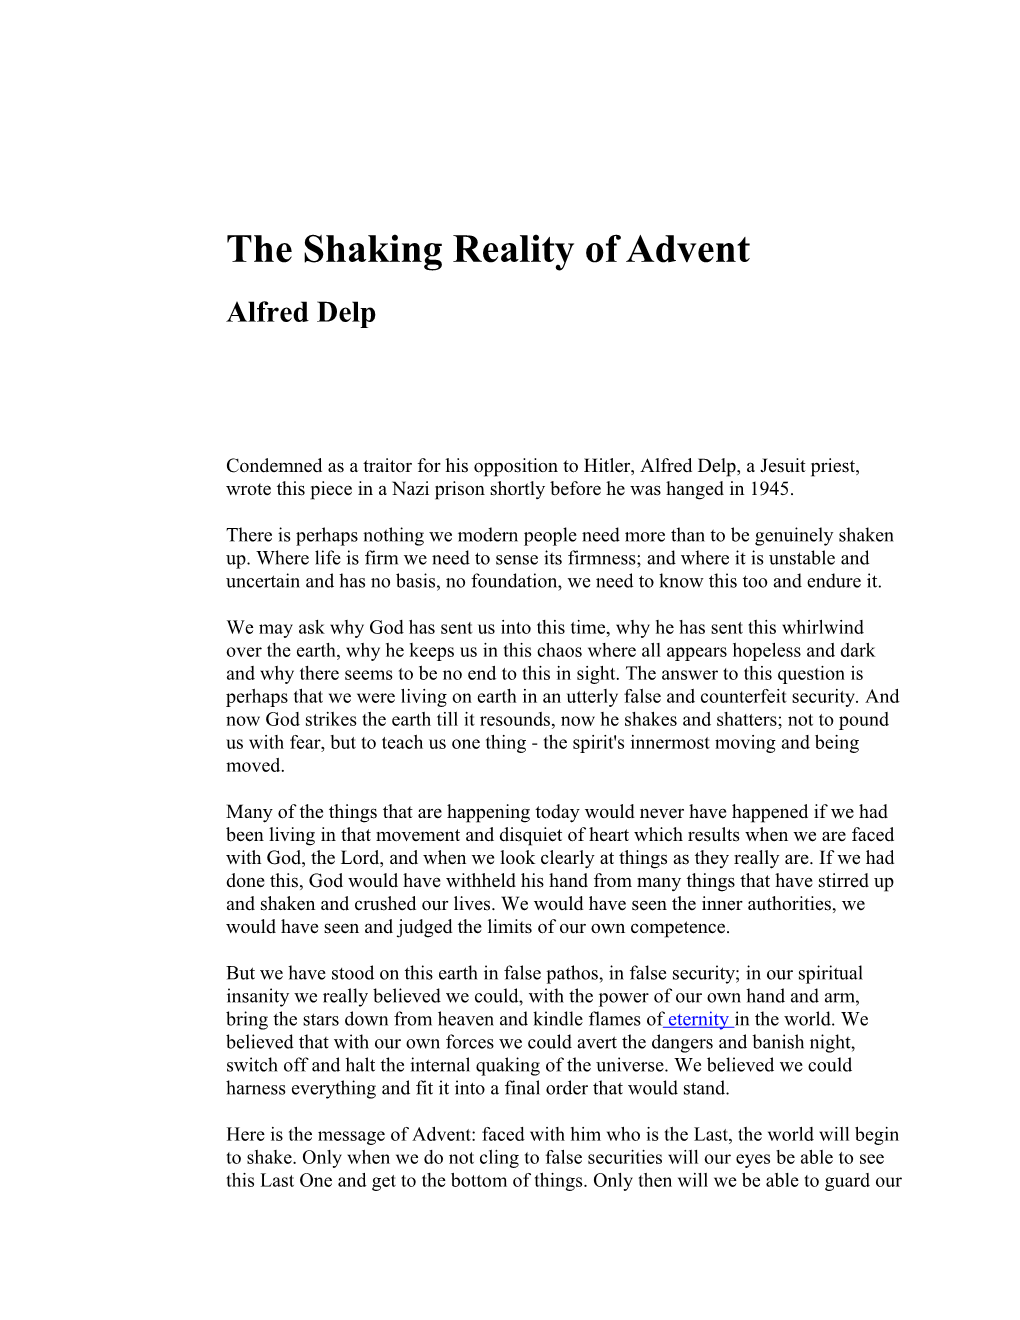 Bruderhof Communities - Alfred Delp - The Shaking Reality Of Advent